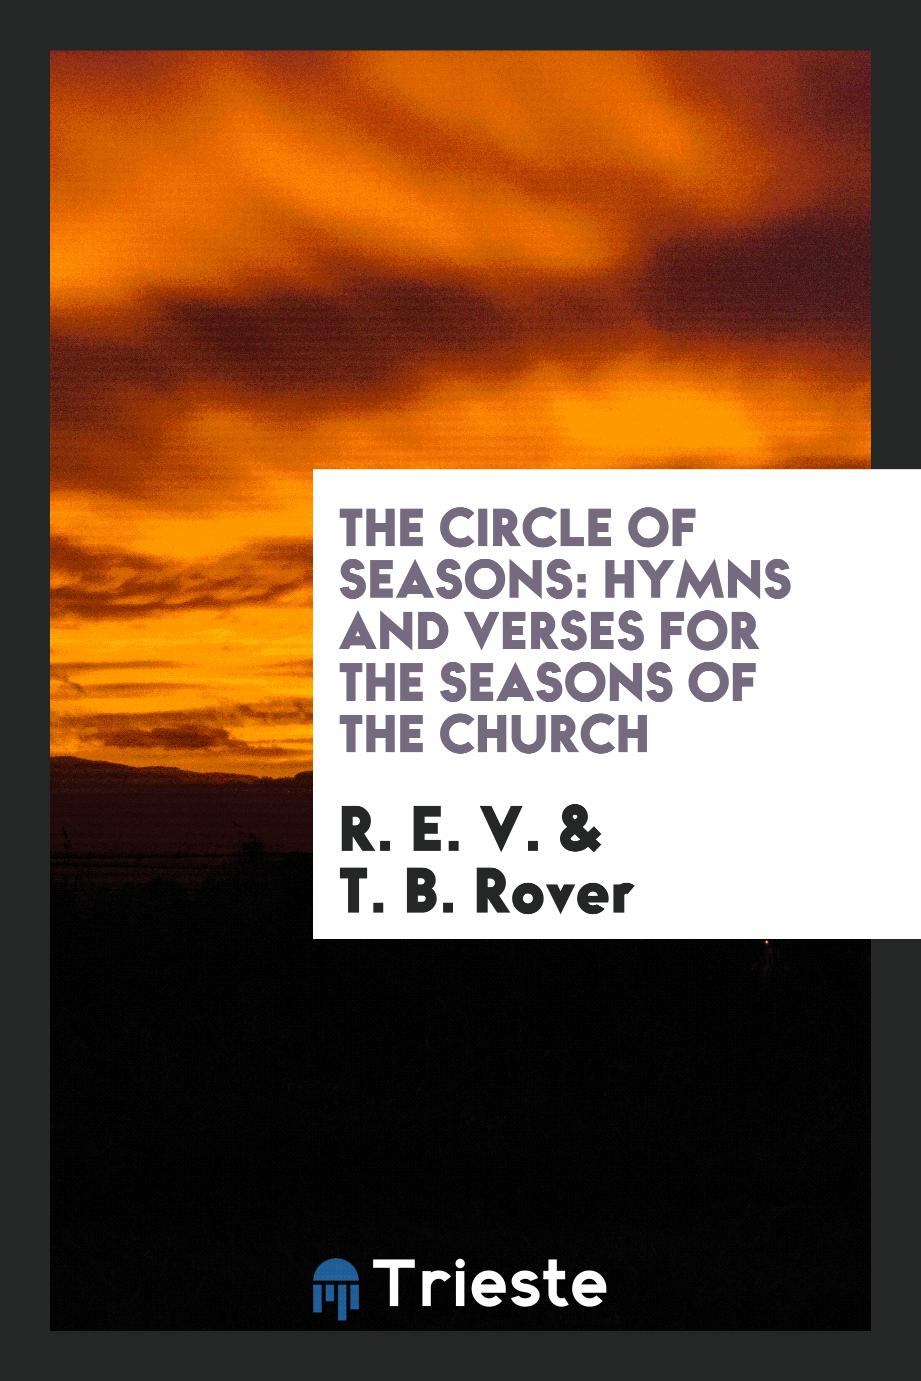 The Circle of Seasons: Hymns and Verses for the Seasons of the Church